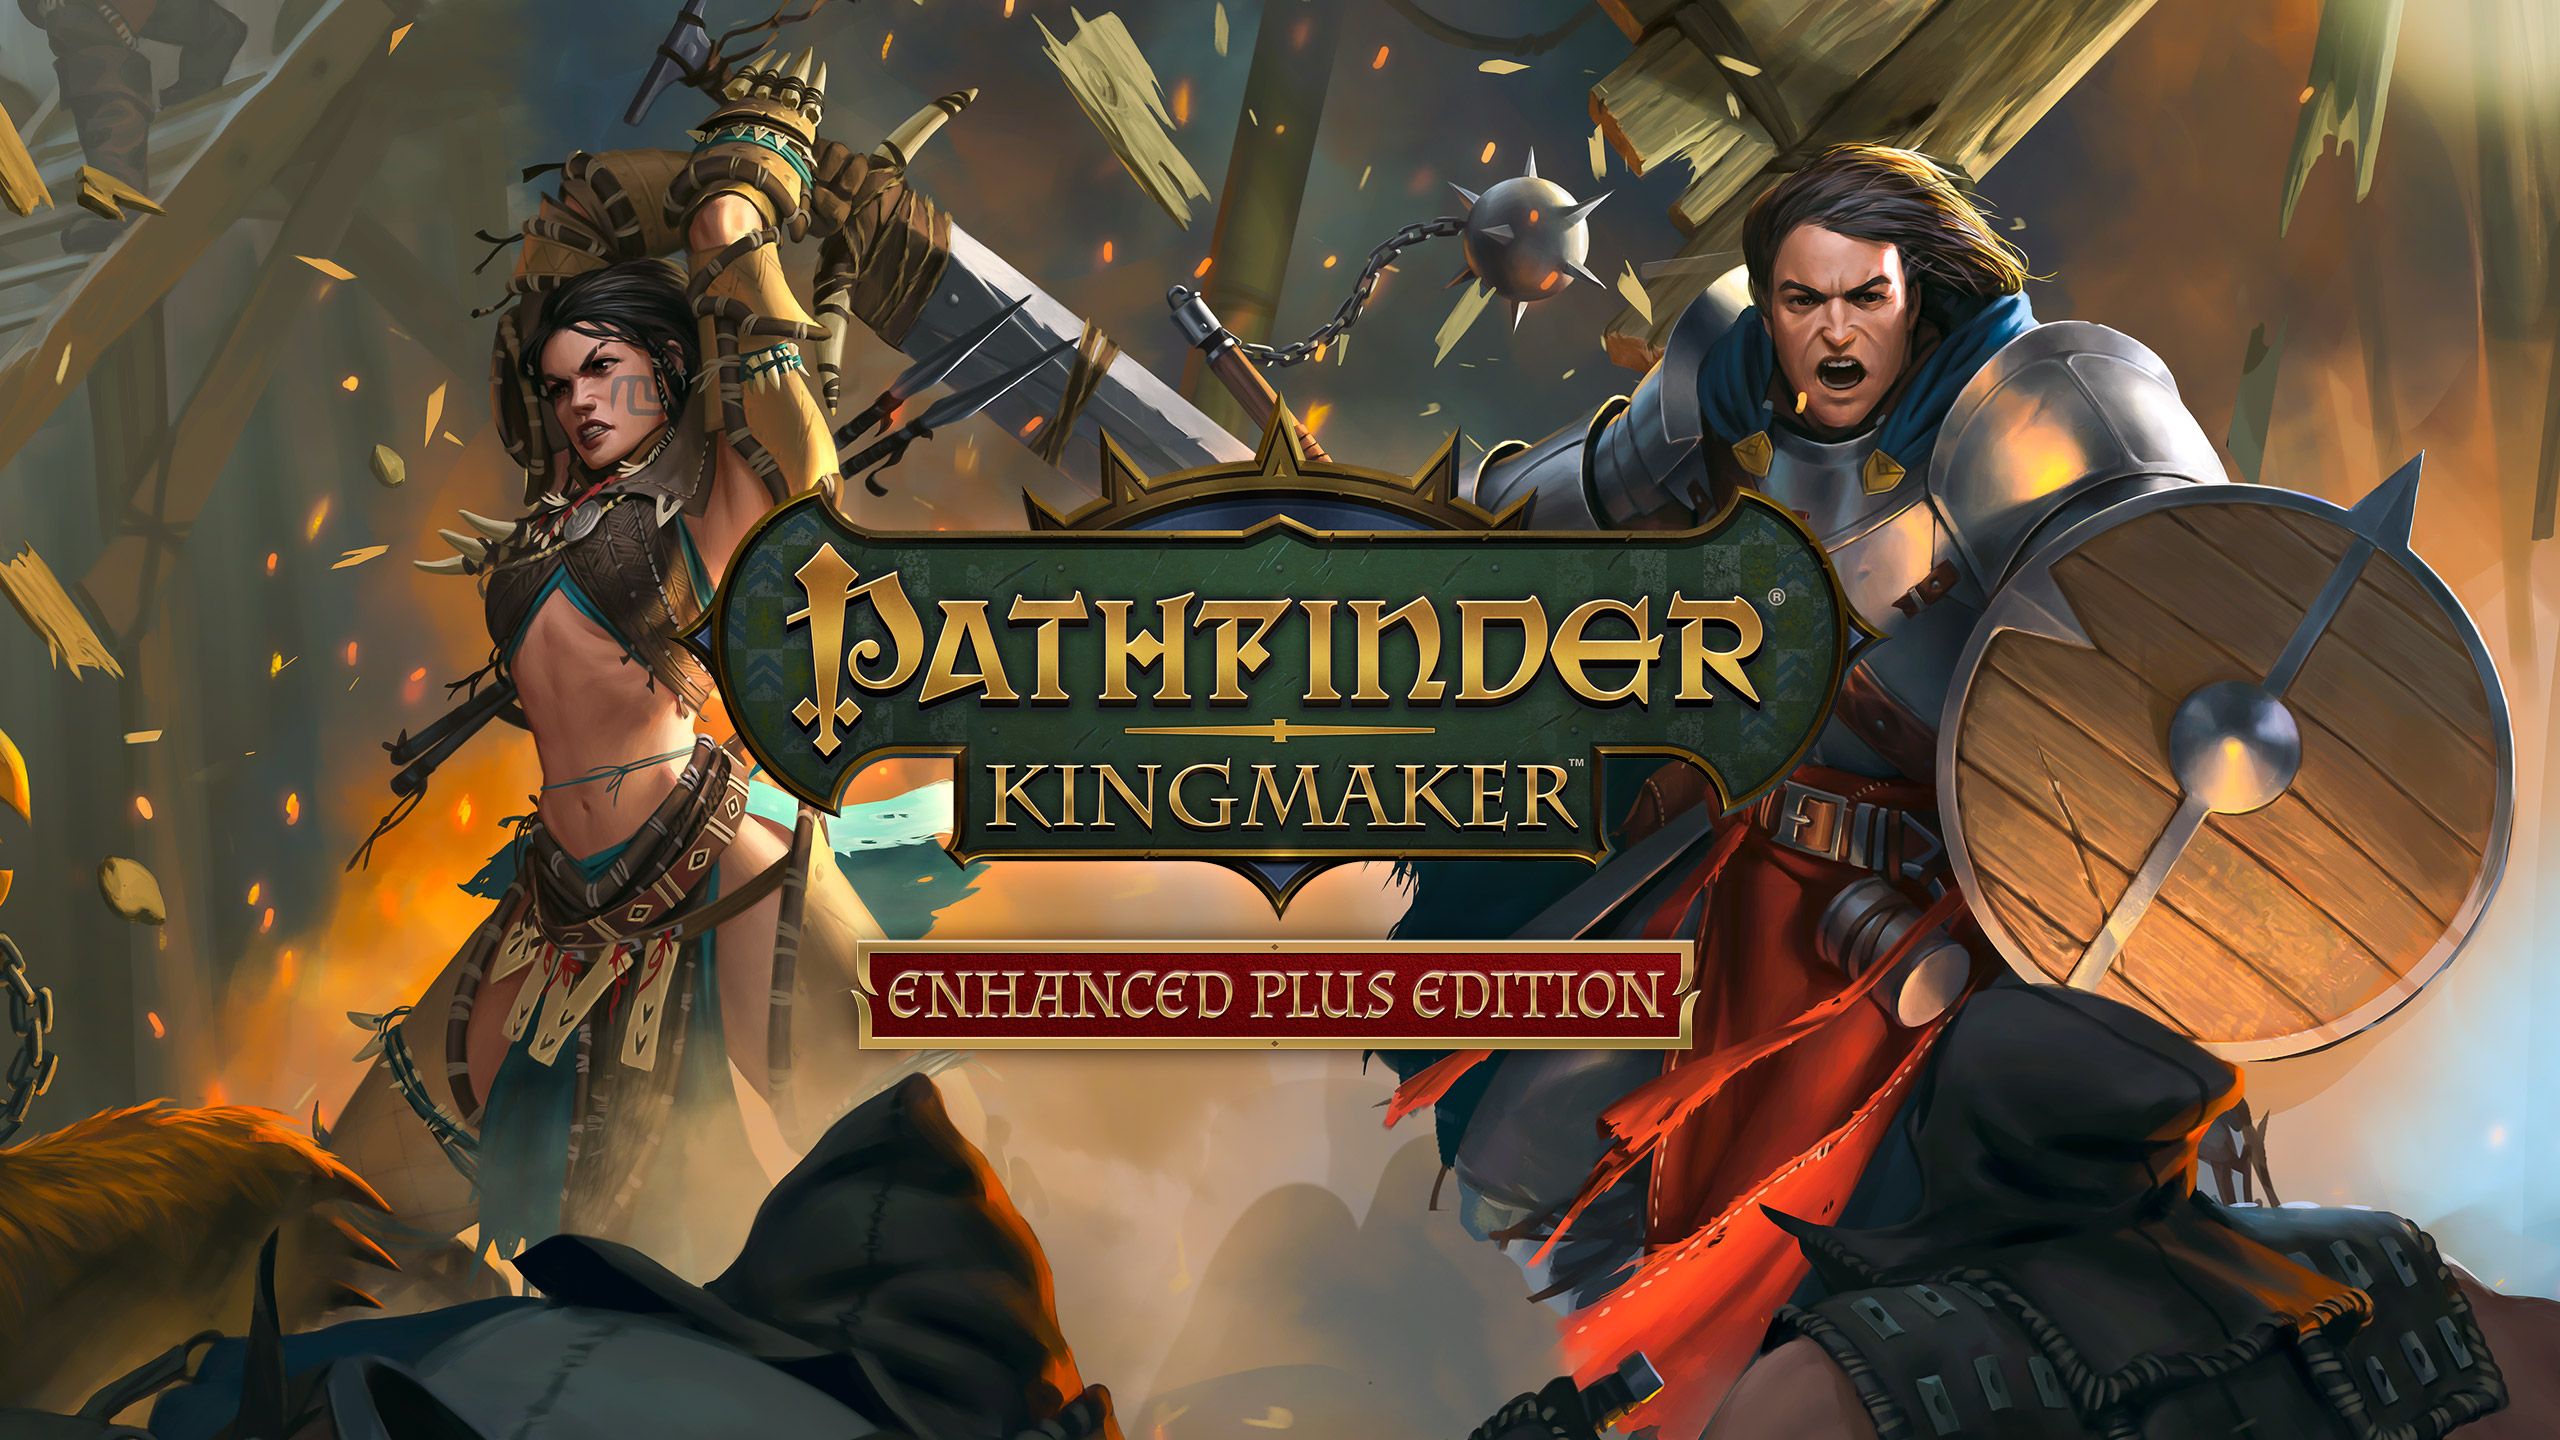 Pathfinder: Kingmaker Plus Edition. Download and Buy Today Games Store